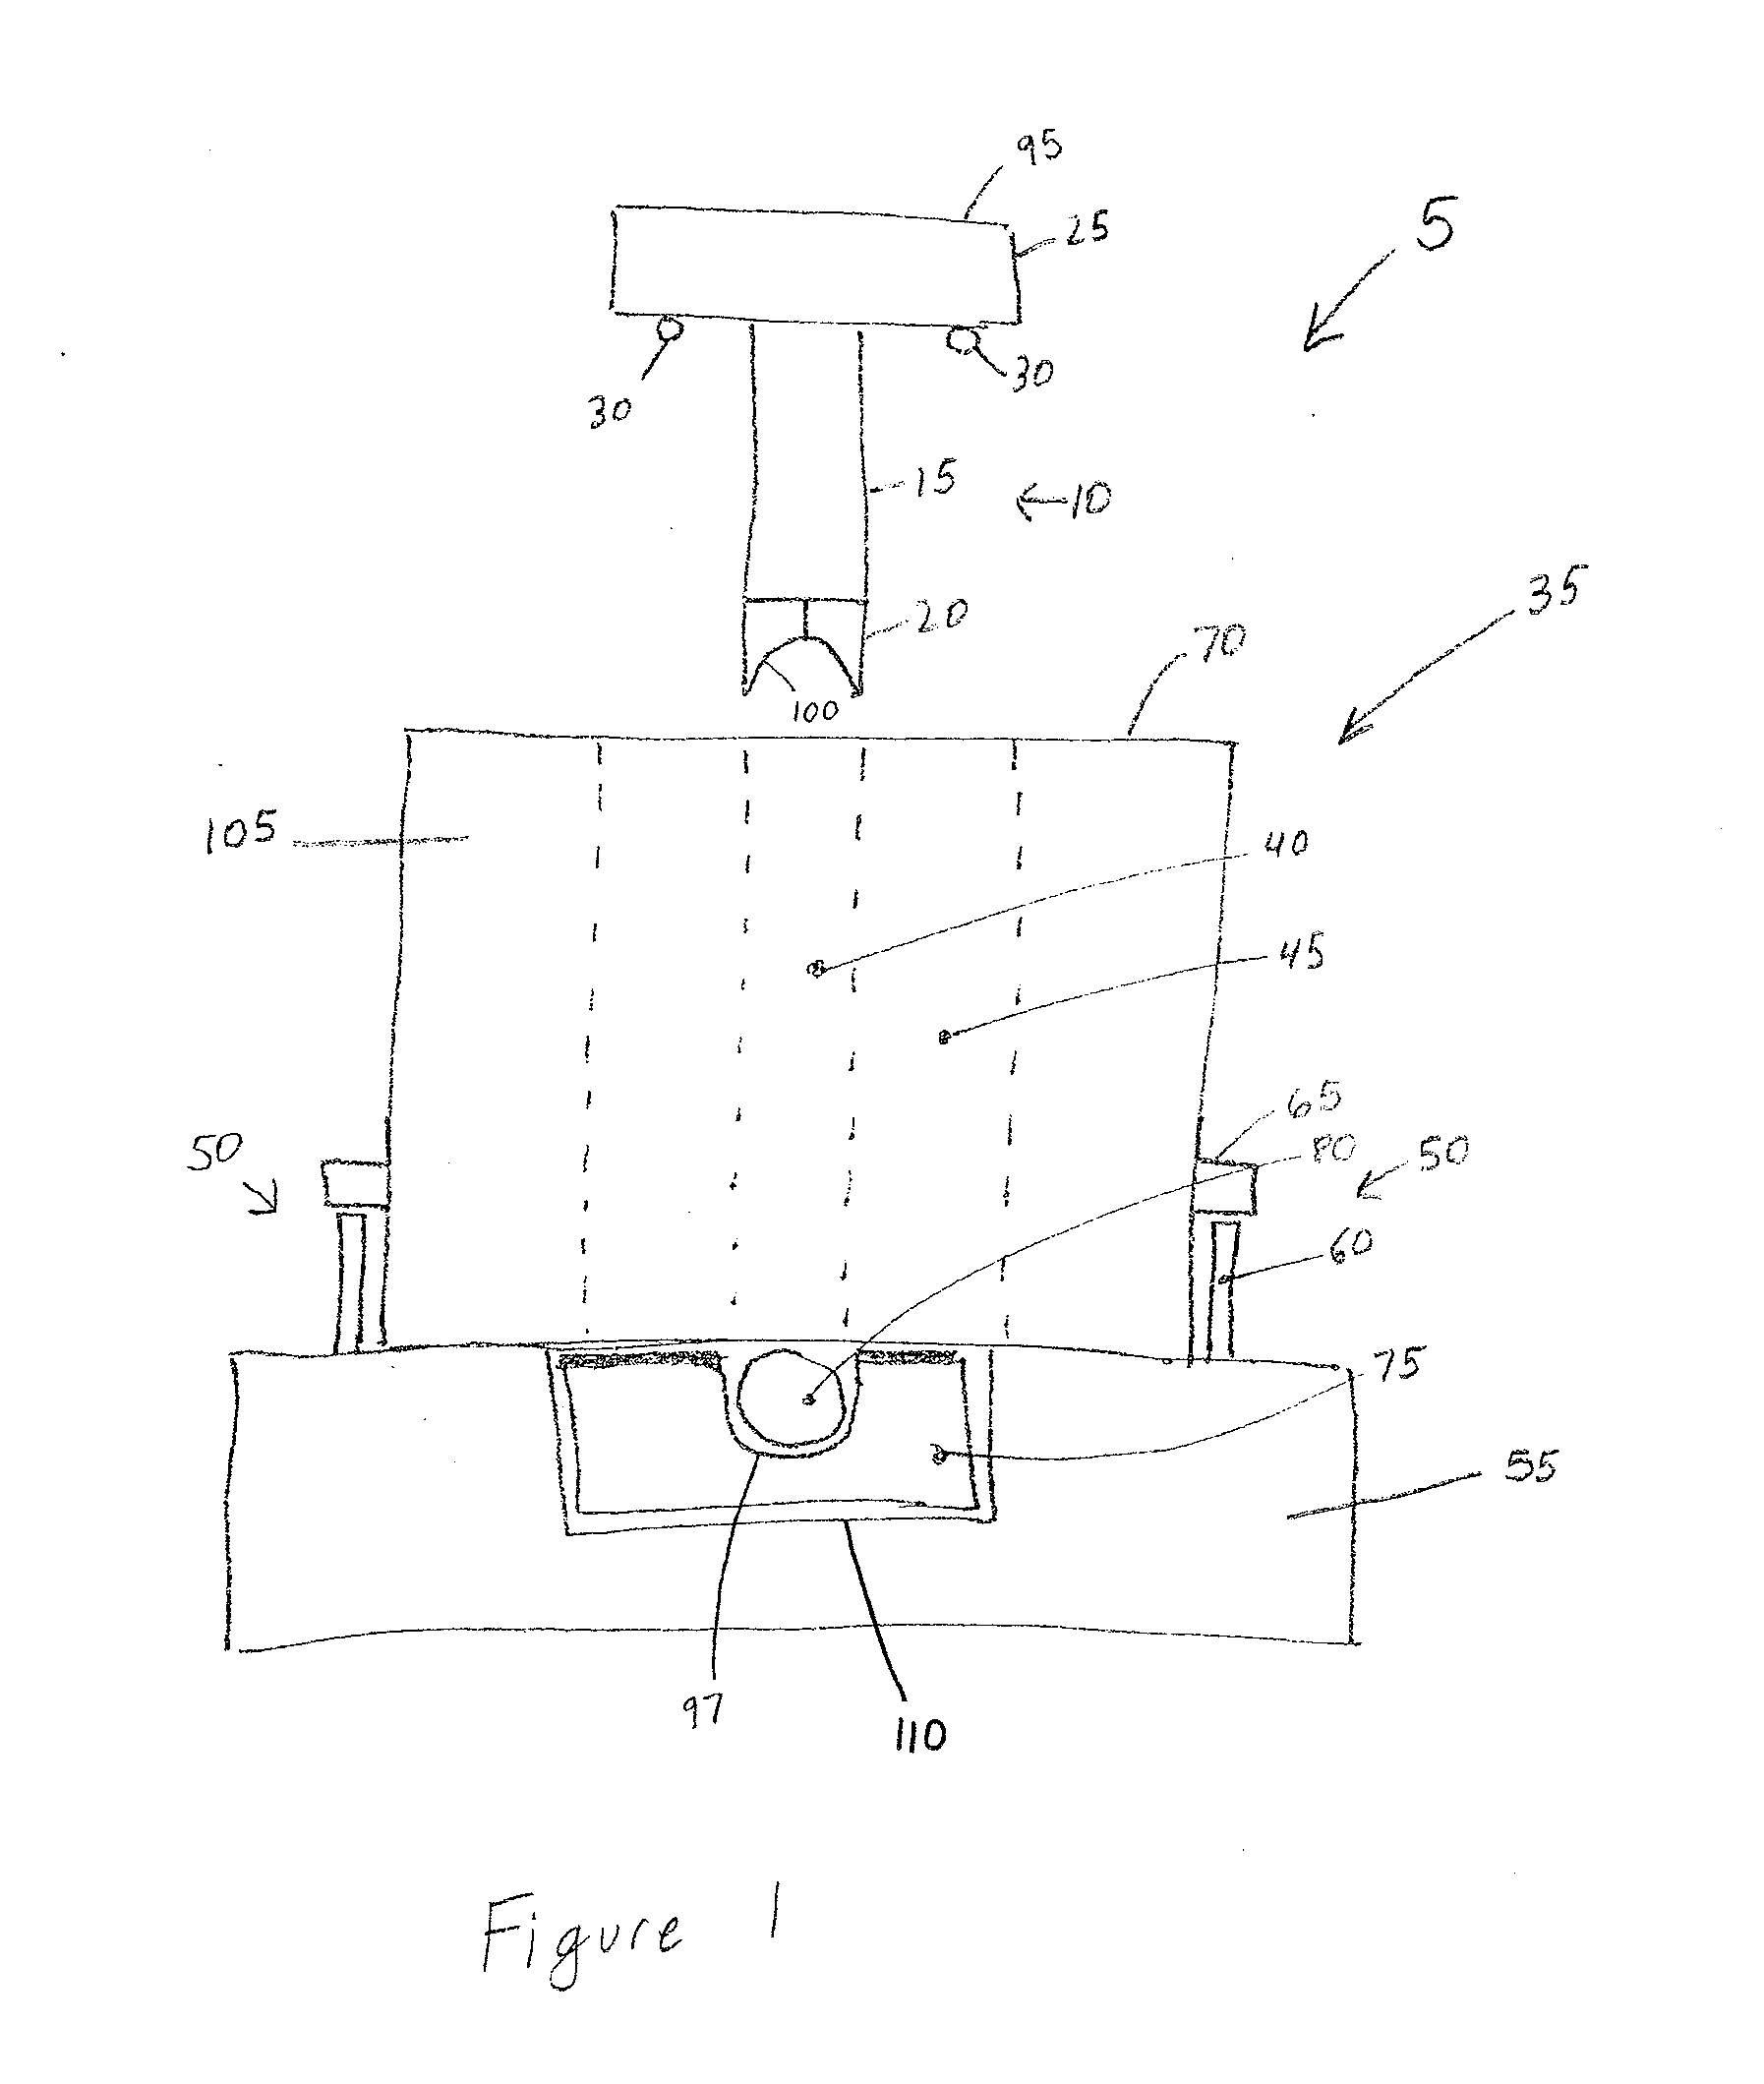 Apparatus for Deformation of Solid Sections